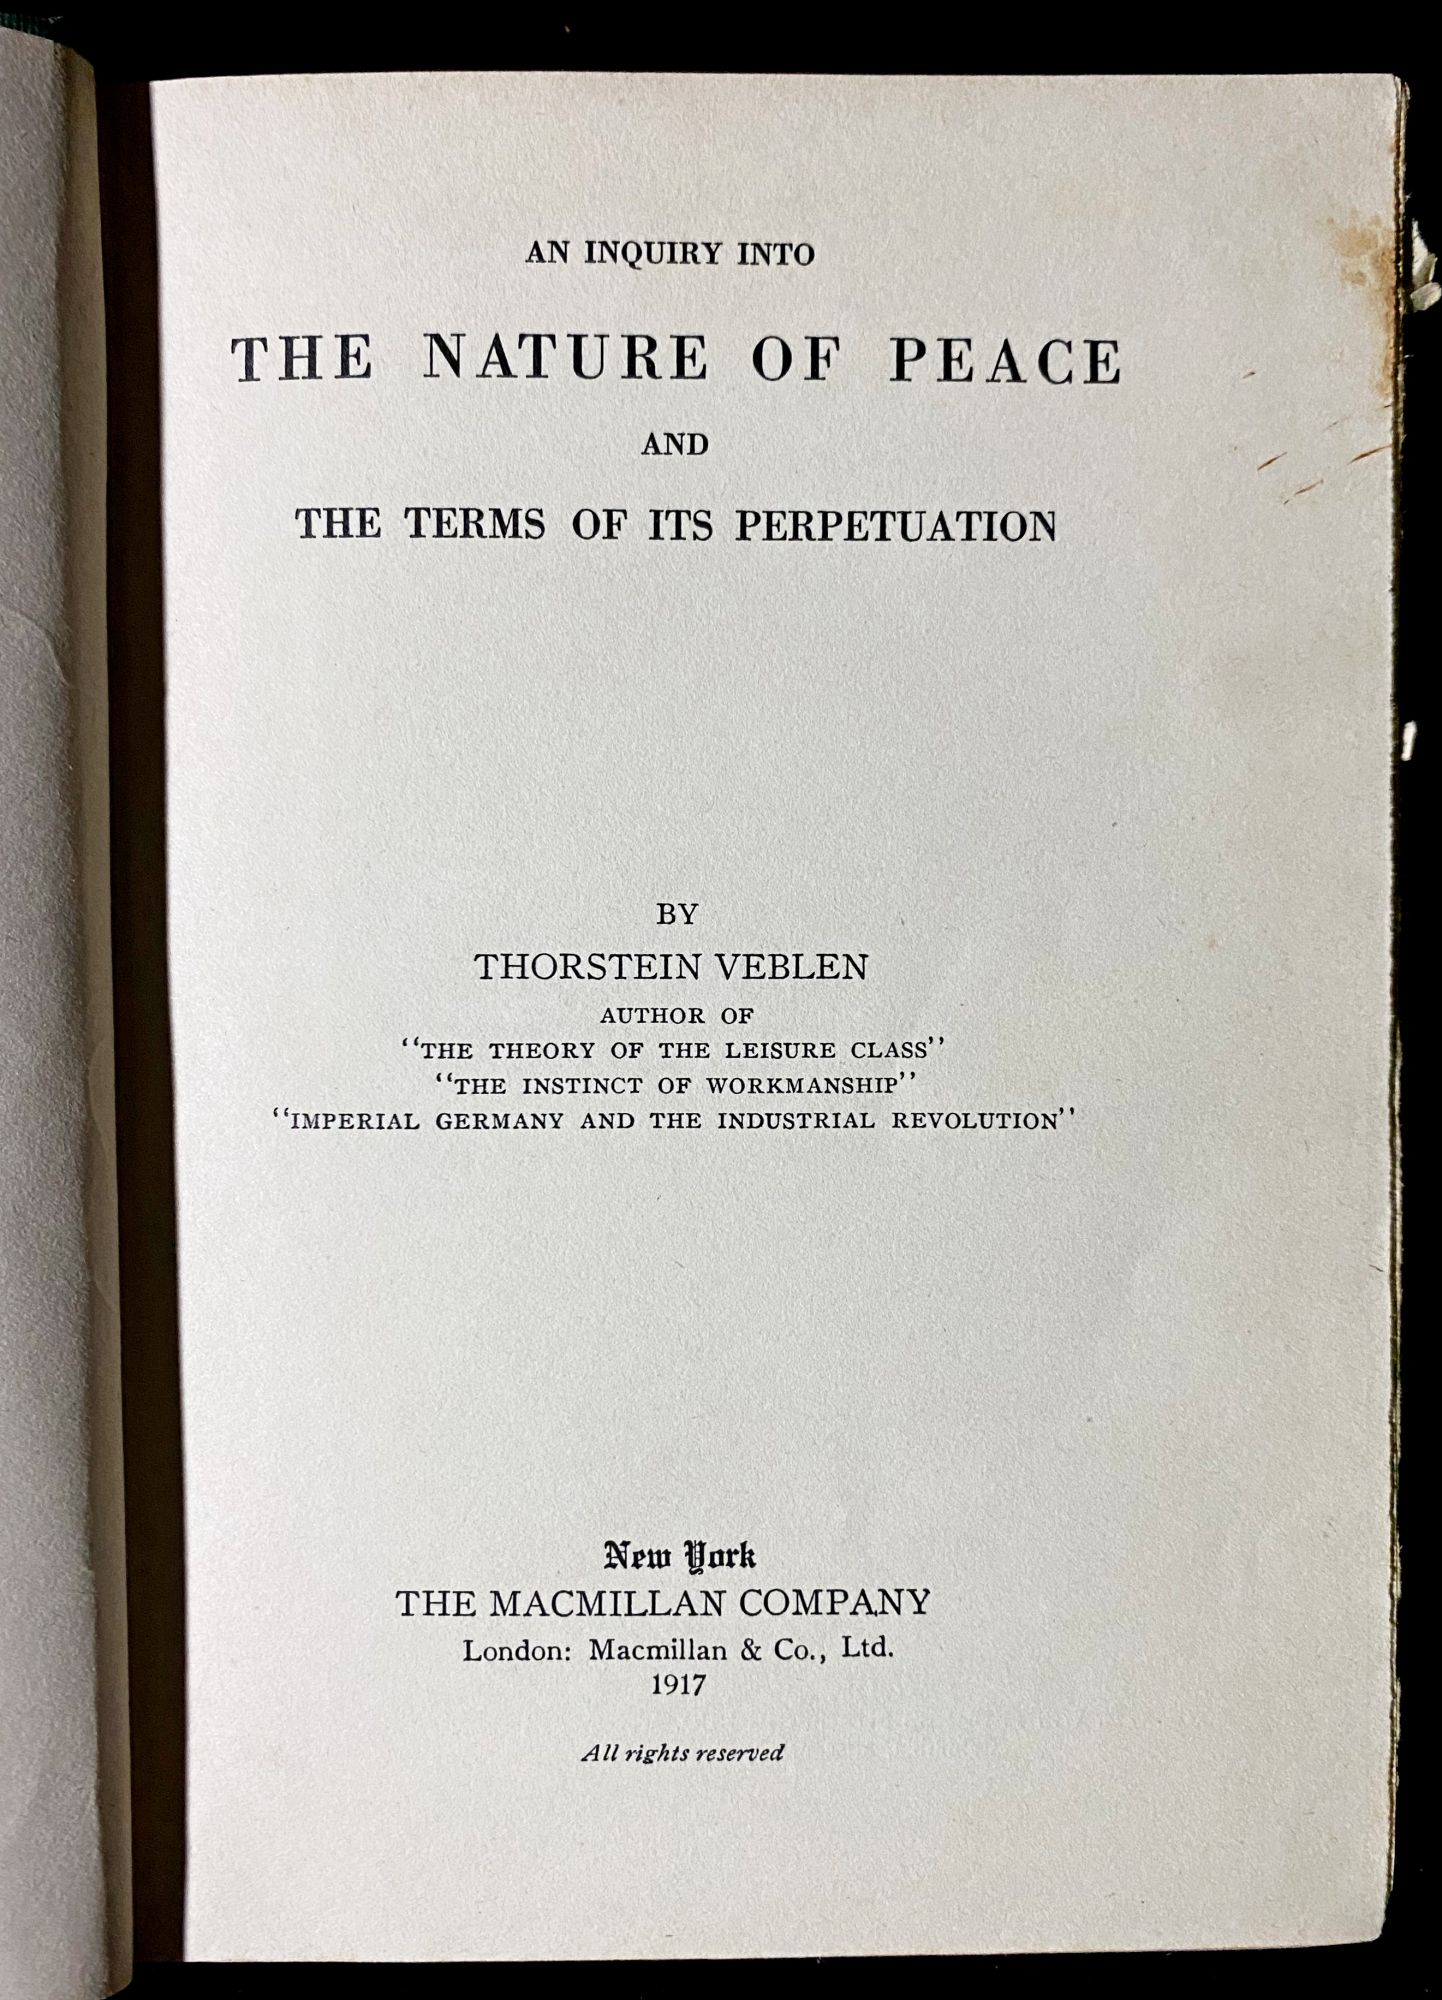 AN INQUIRY INTO THE NATURE OF PEACE AND THE TERMS OF ITS PERPETUATION - Veblen, Thorstein.[Michael Walzer's copy with his ownership signature]